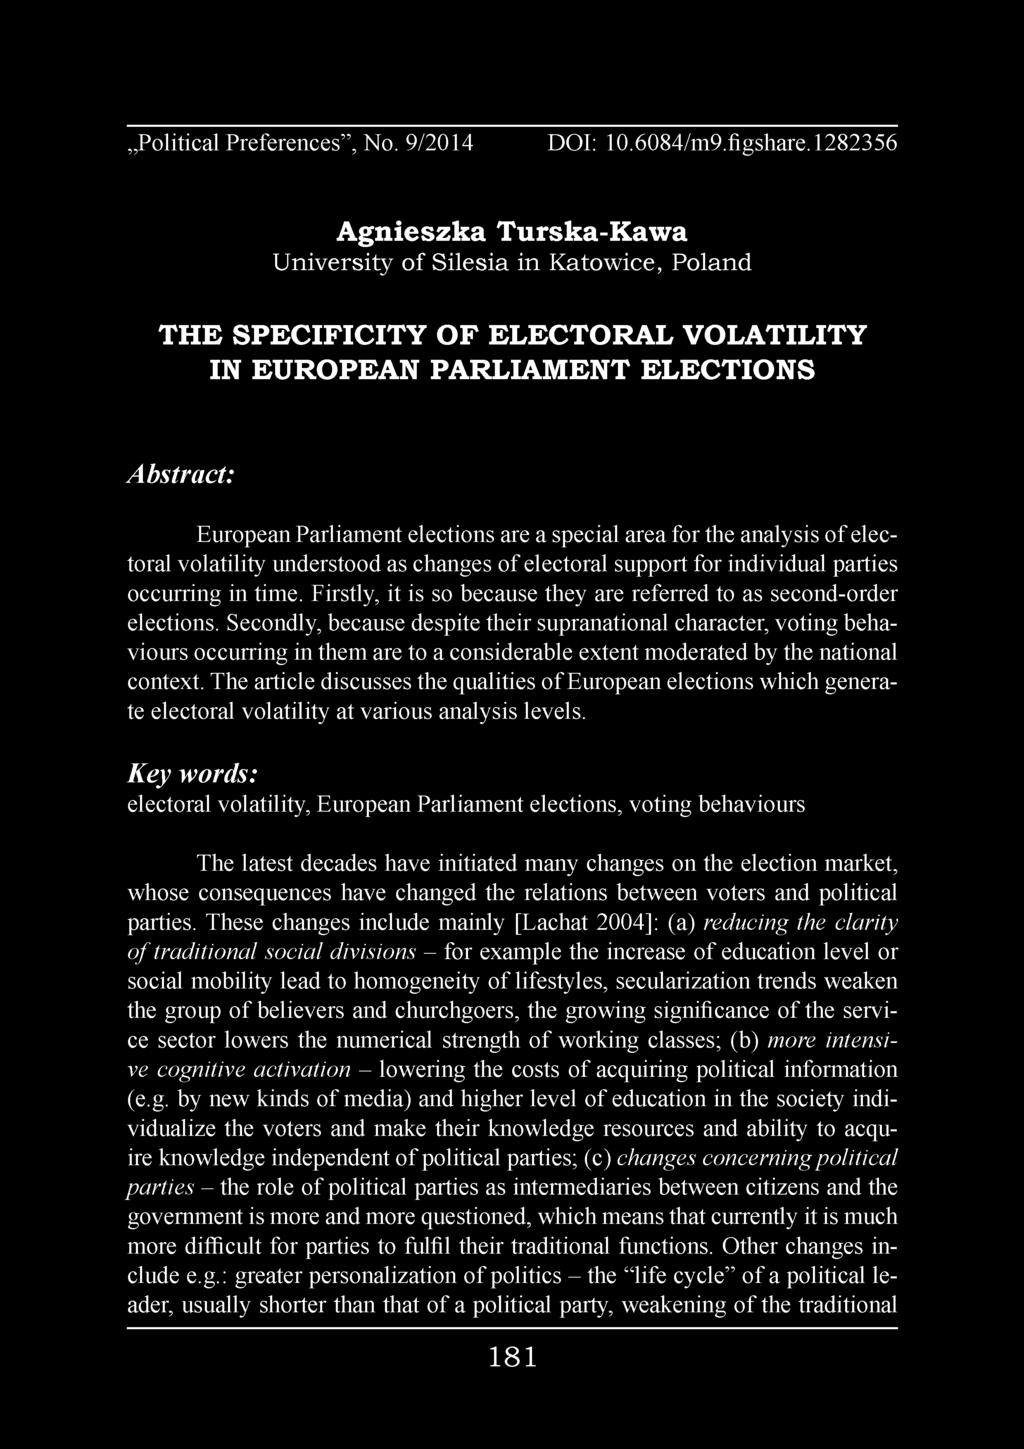 area for the analysis o f electoral volatility understood as changes of electoral support for individual parties occurring in time.